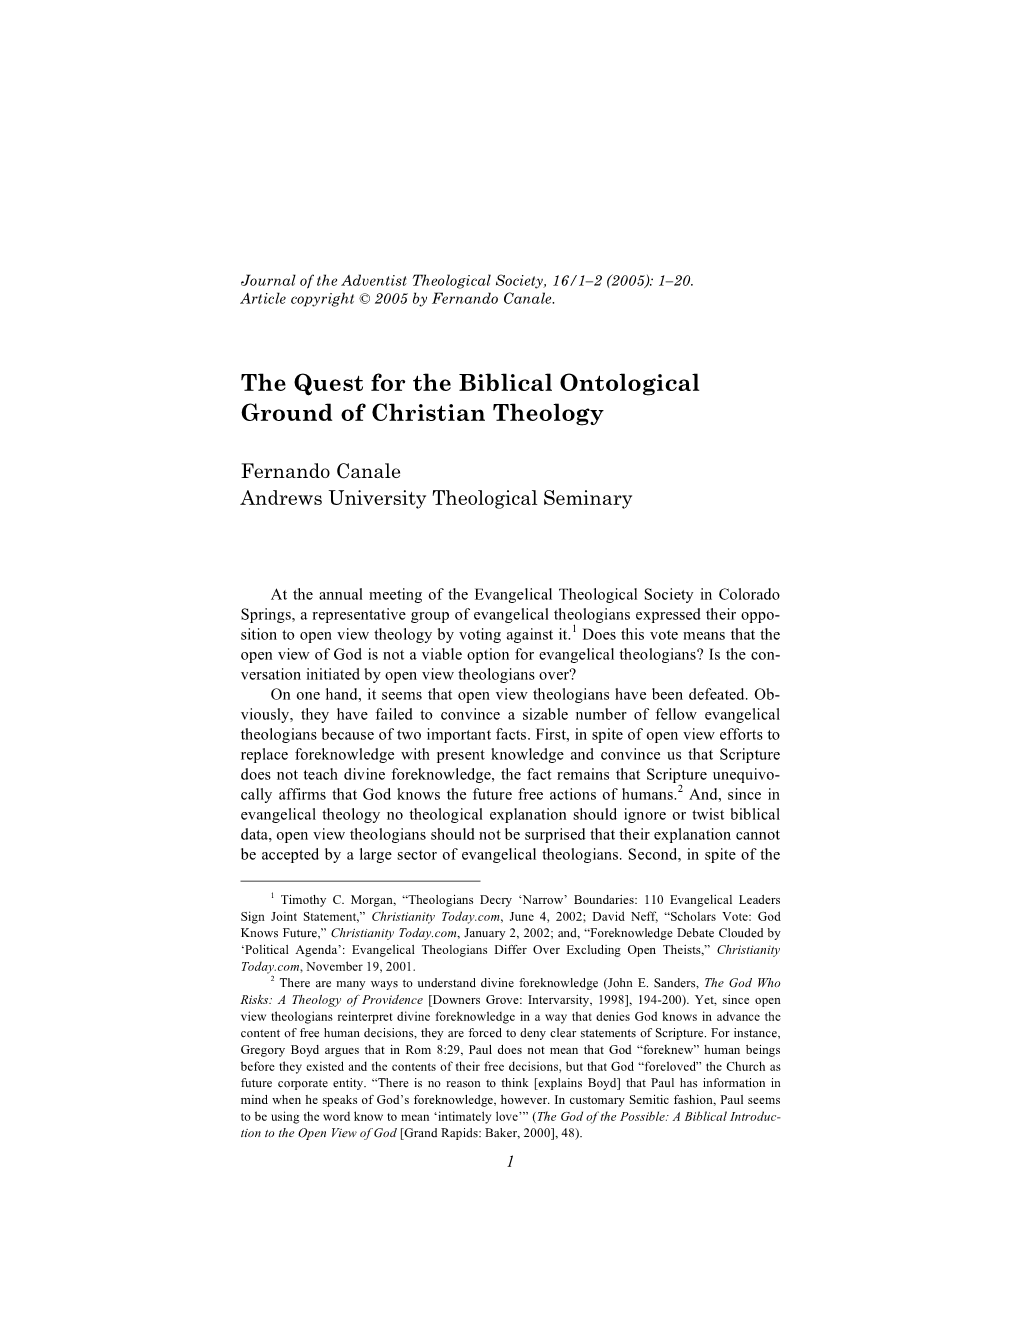 The Quest for the Biblical Ontological Ground of Christian Theology